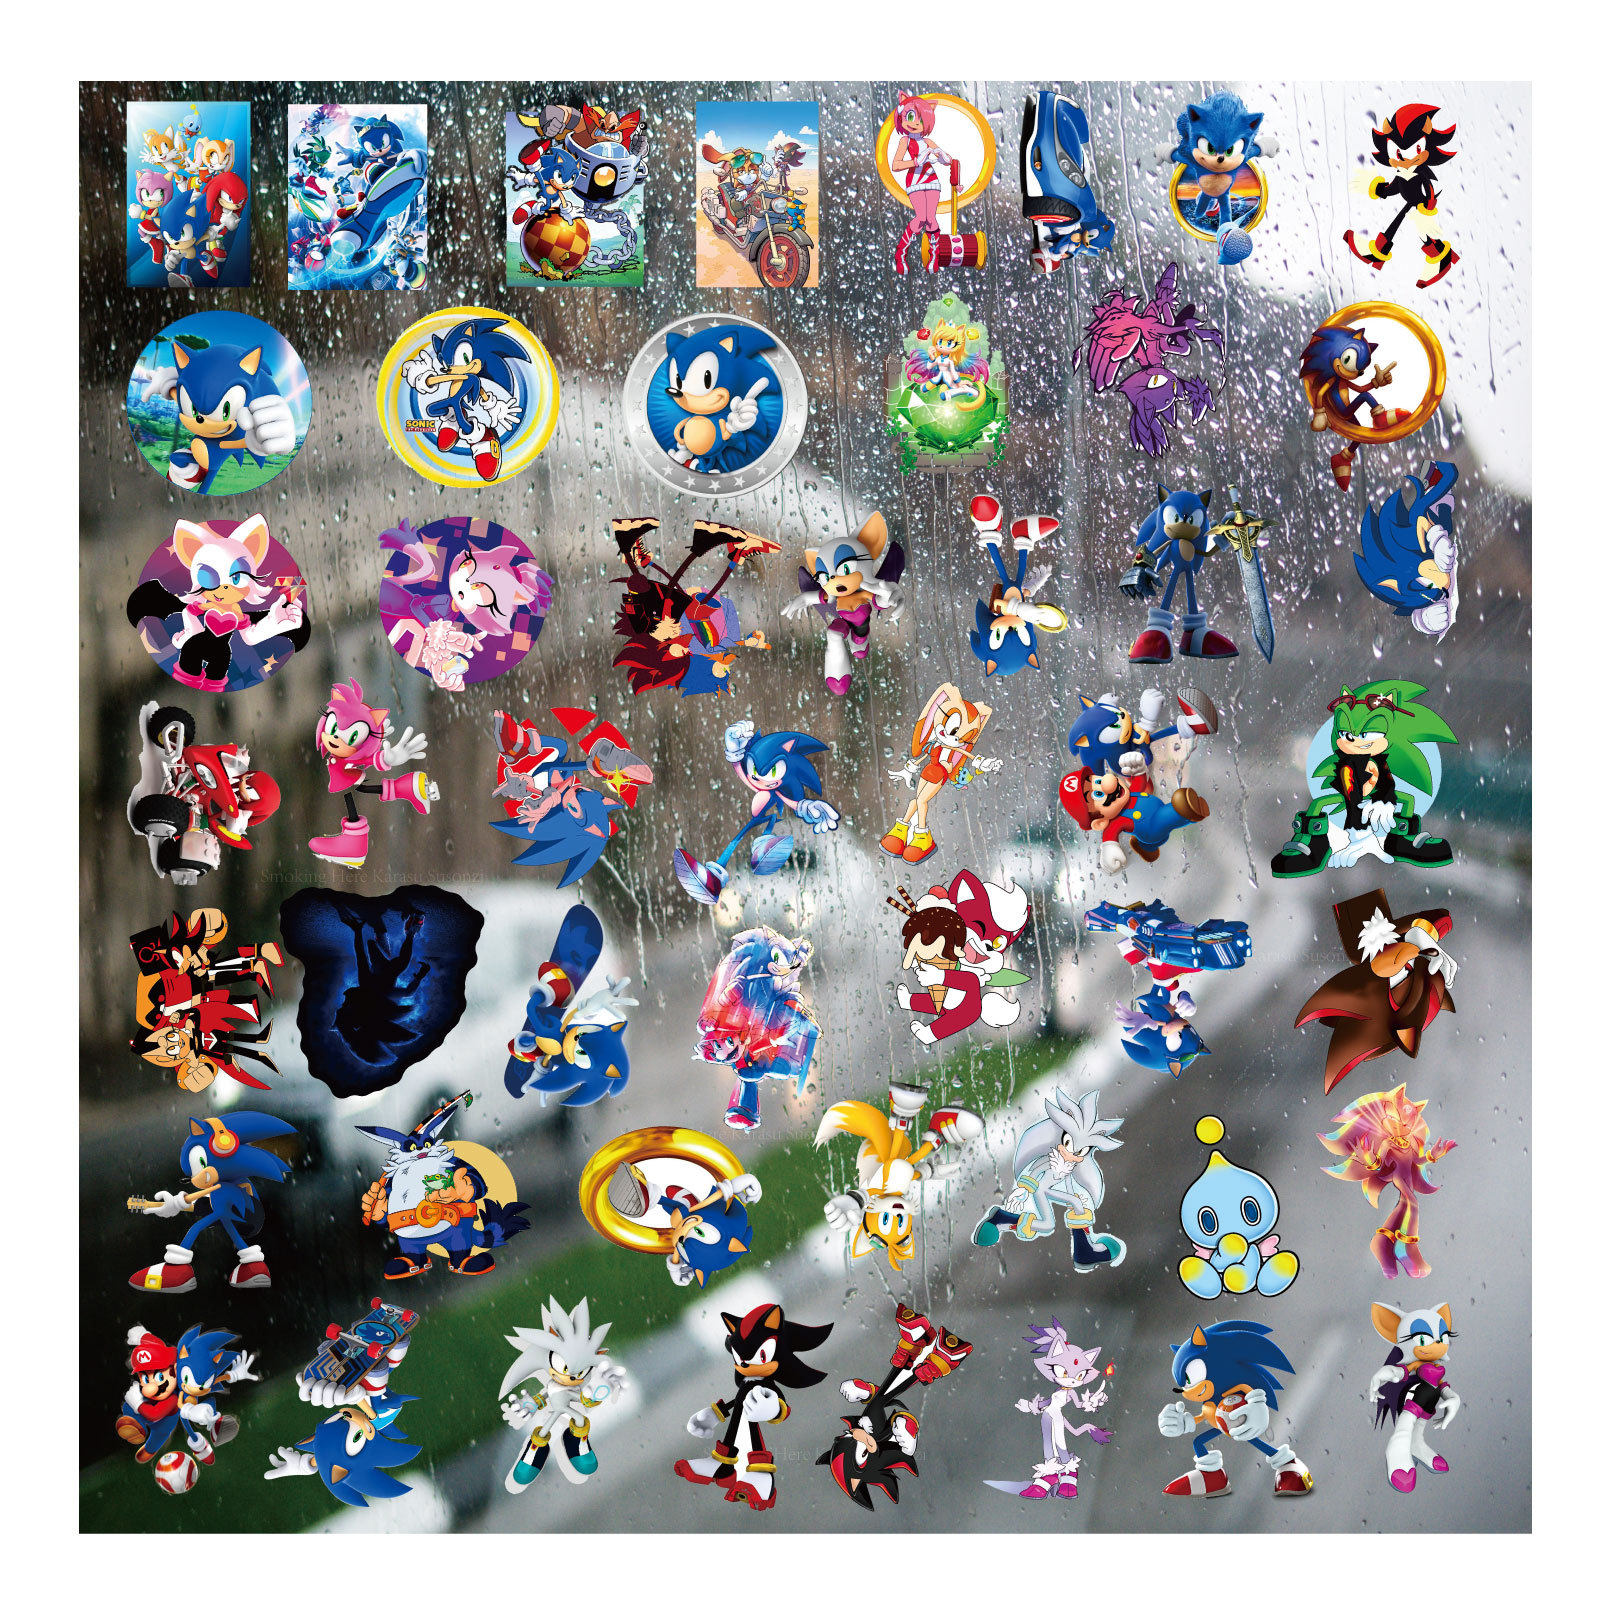 Sonic anime 3D sticker price for a set of 50pcs